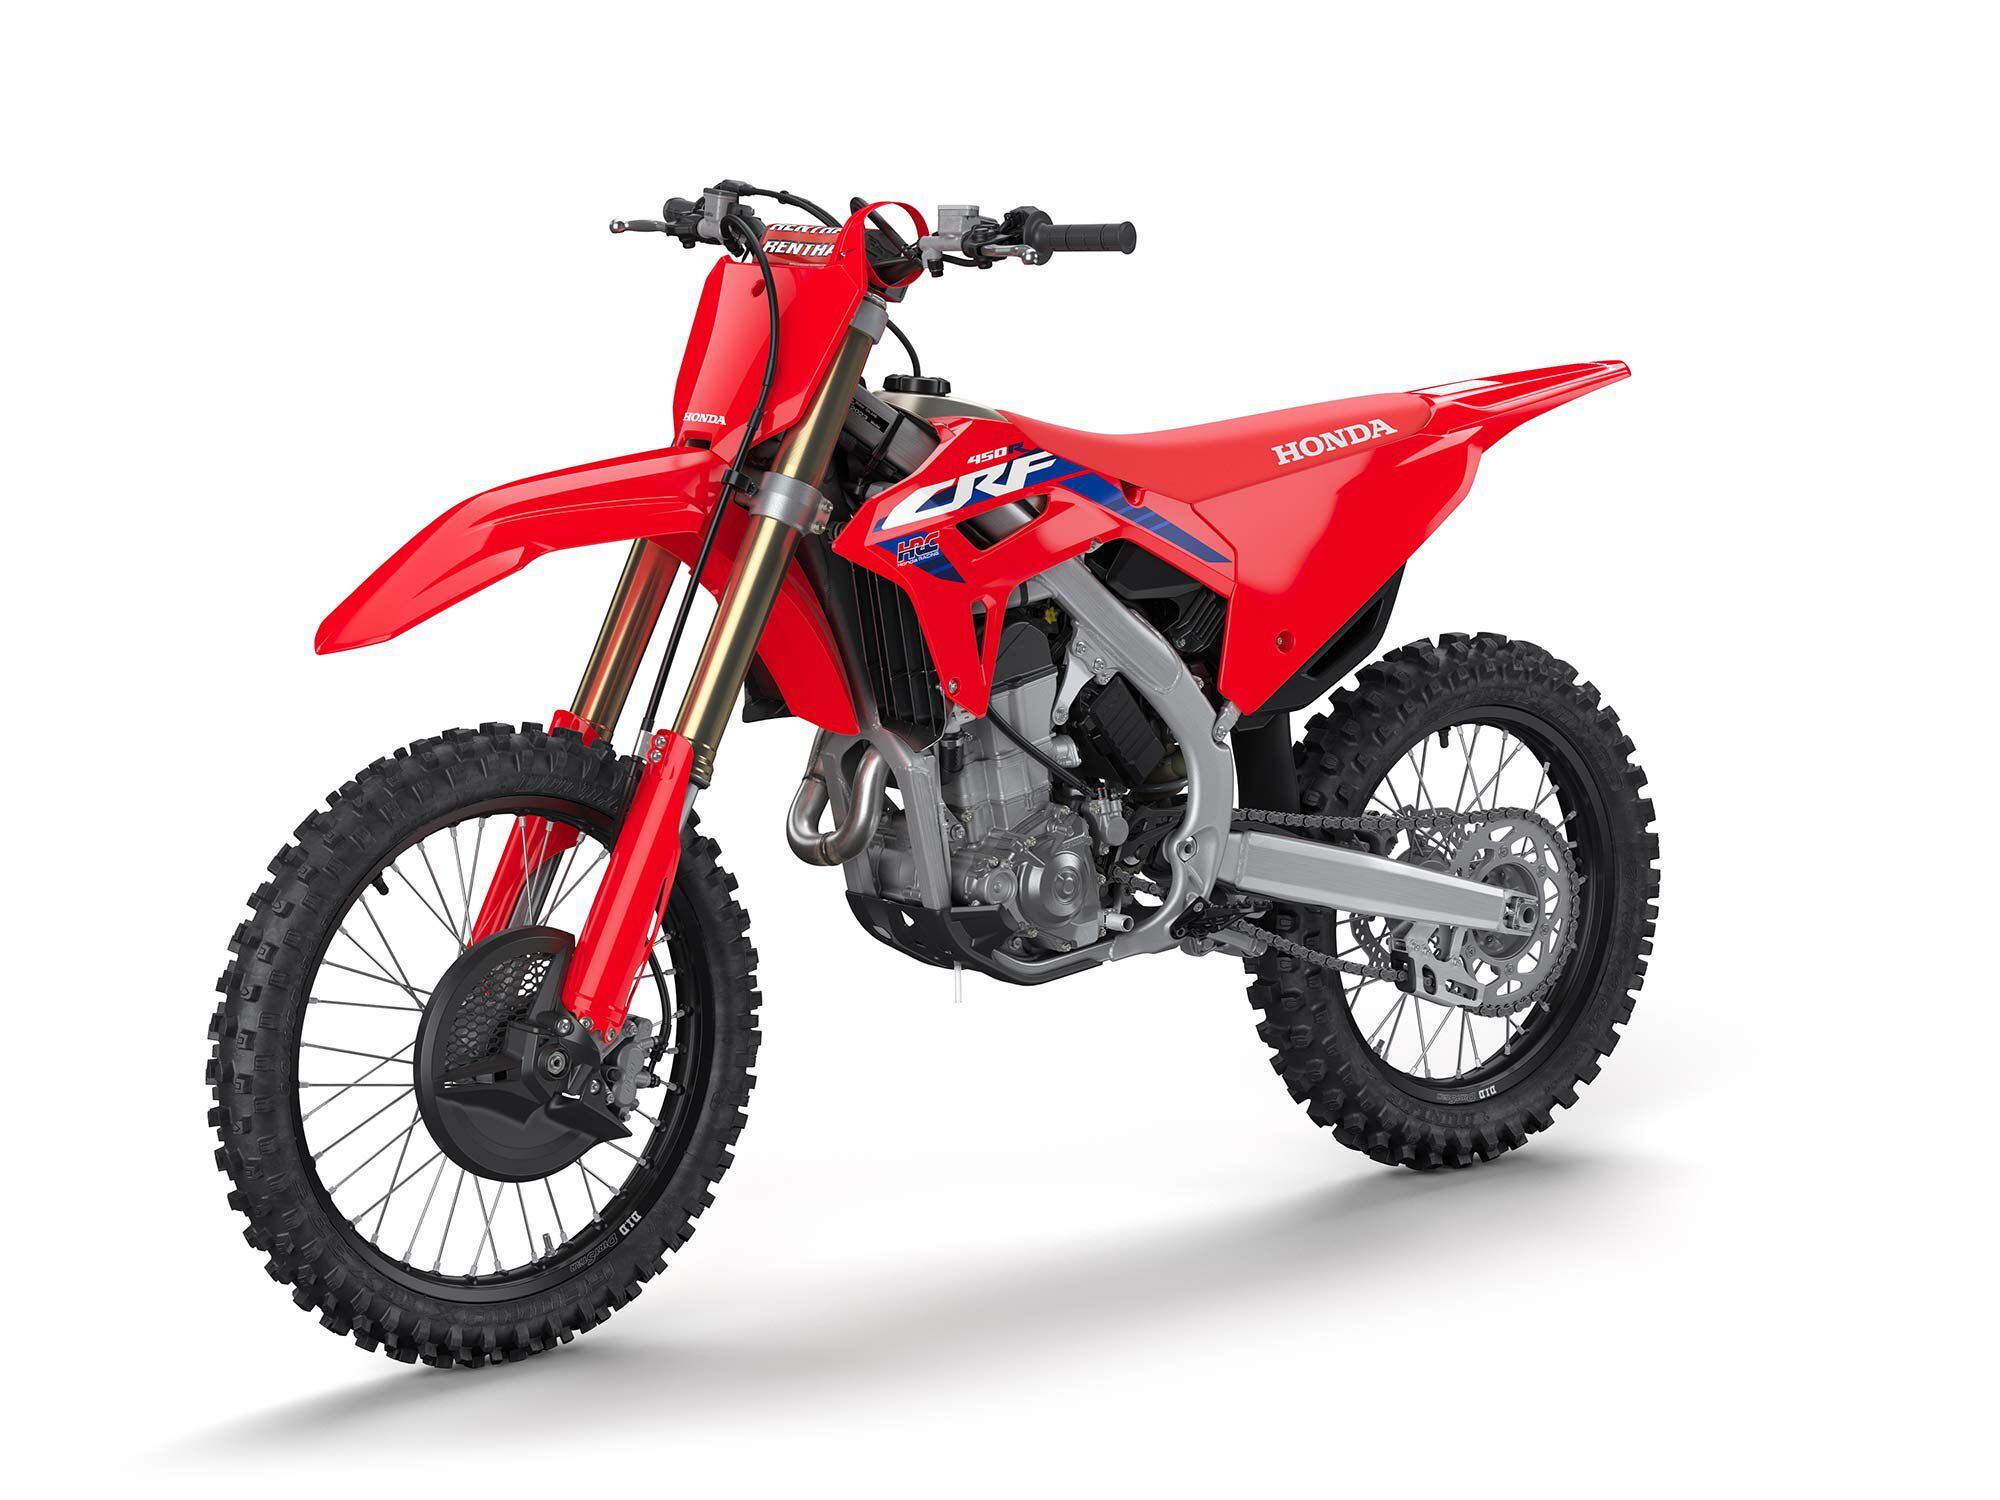 The 2023 CRF450R is priced at $9,599.